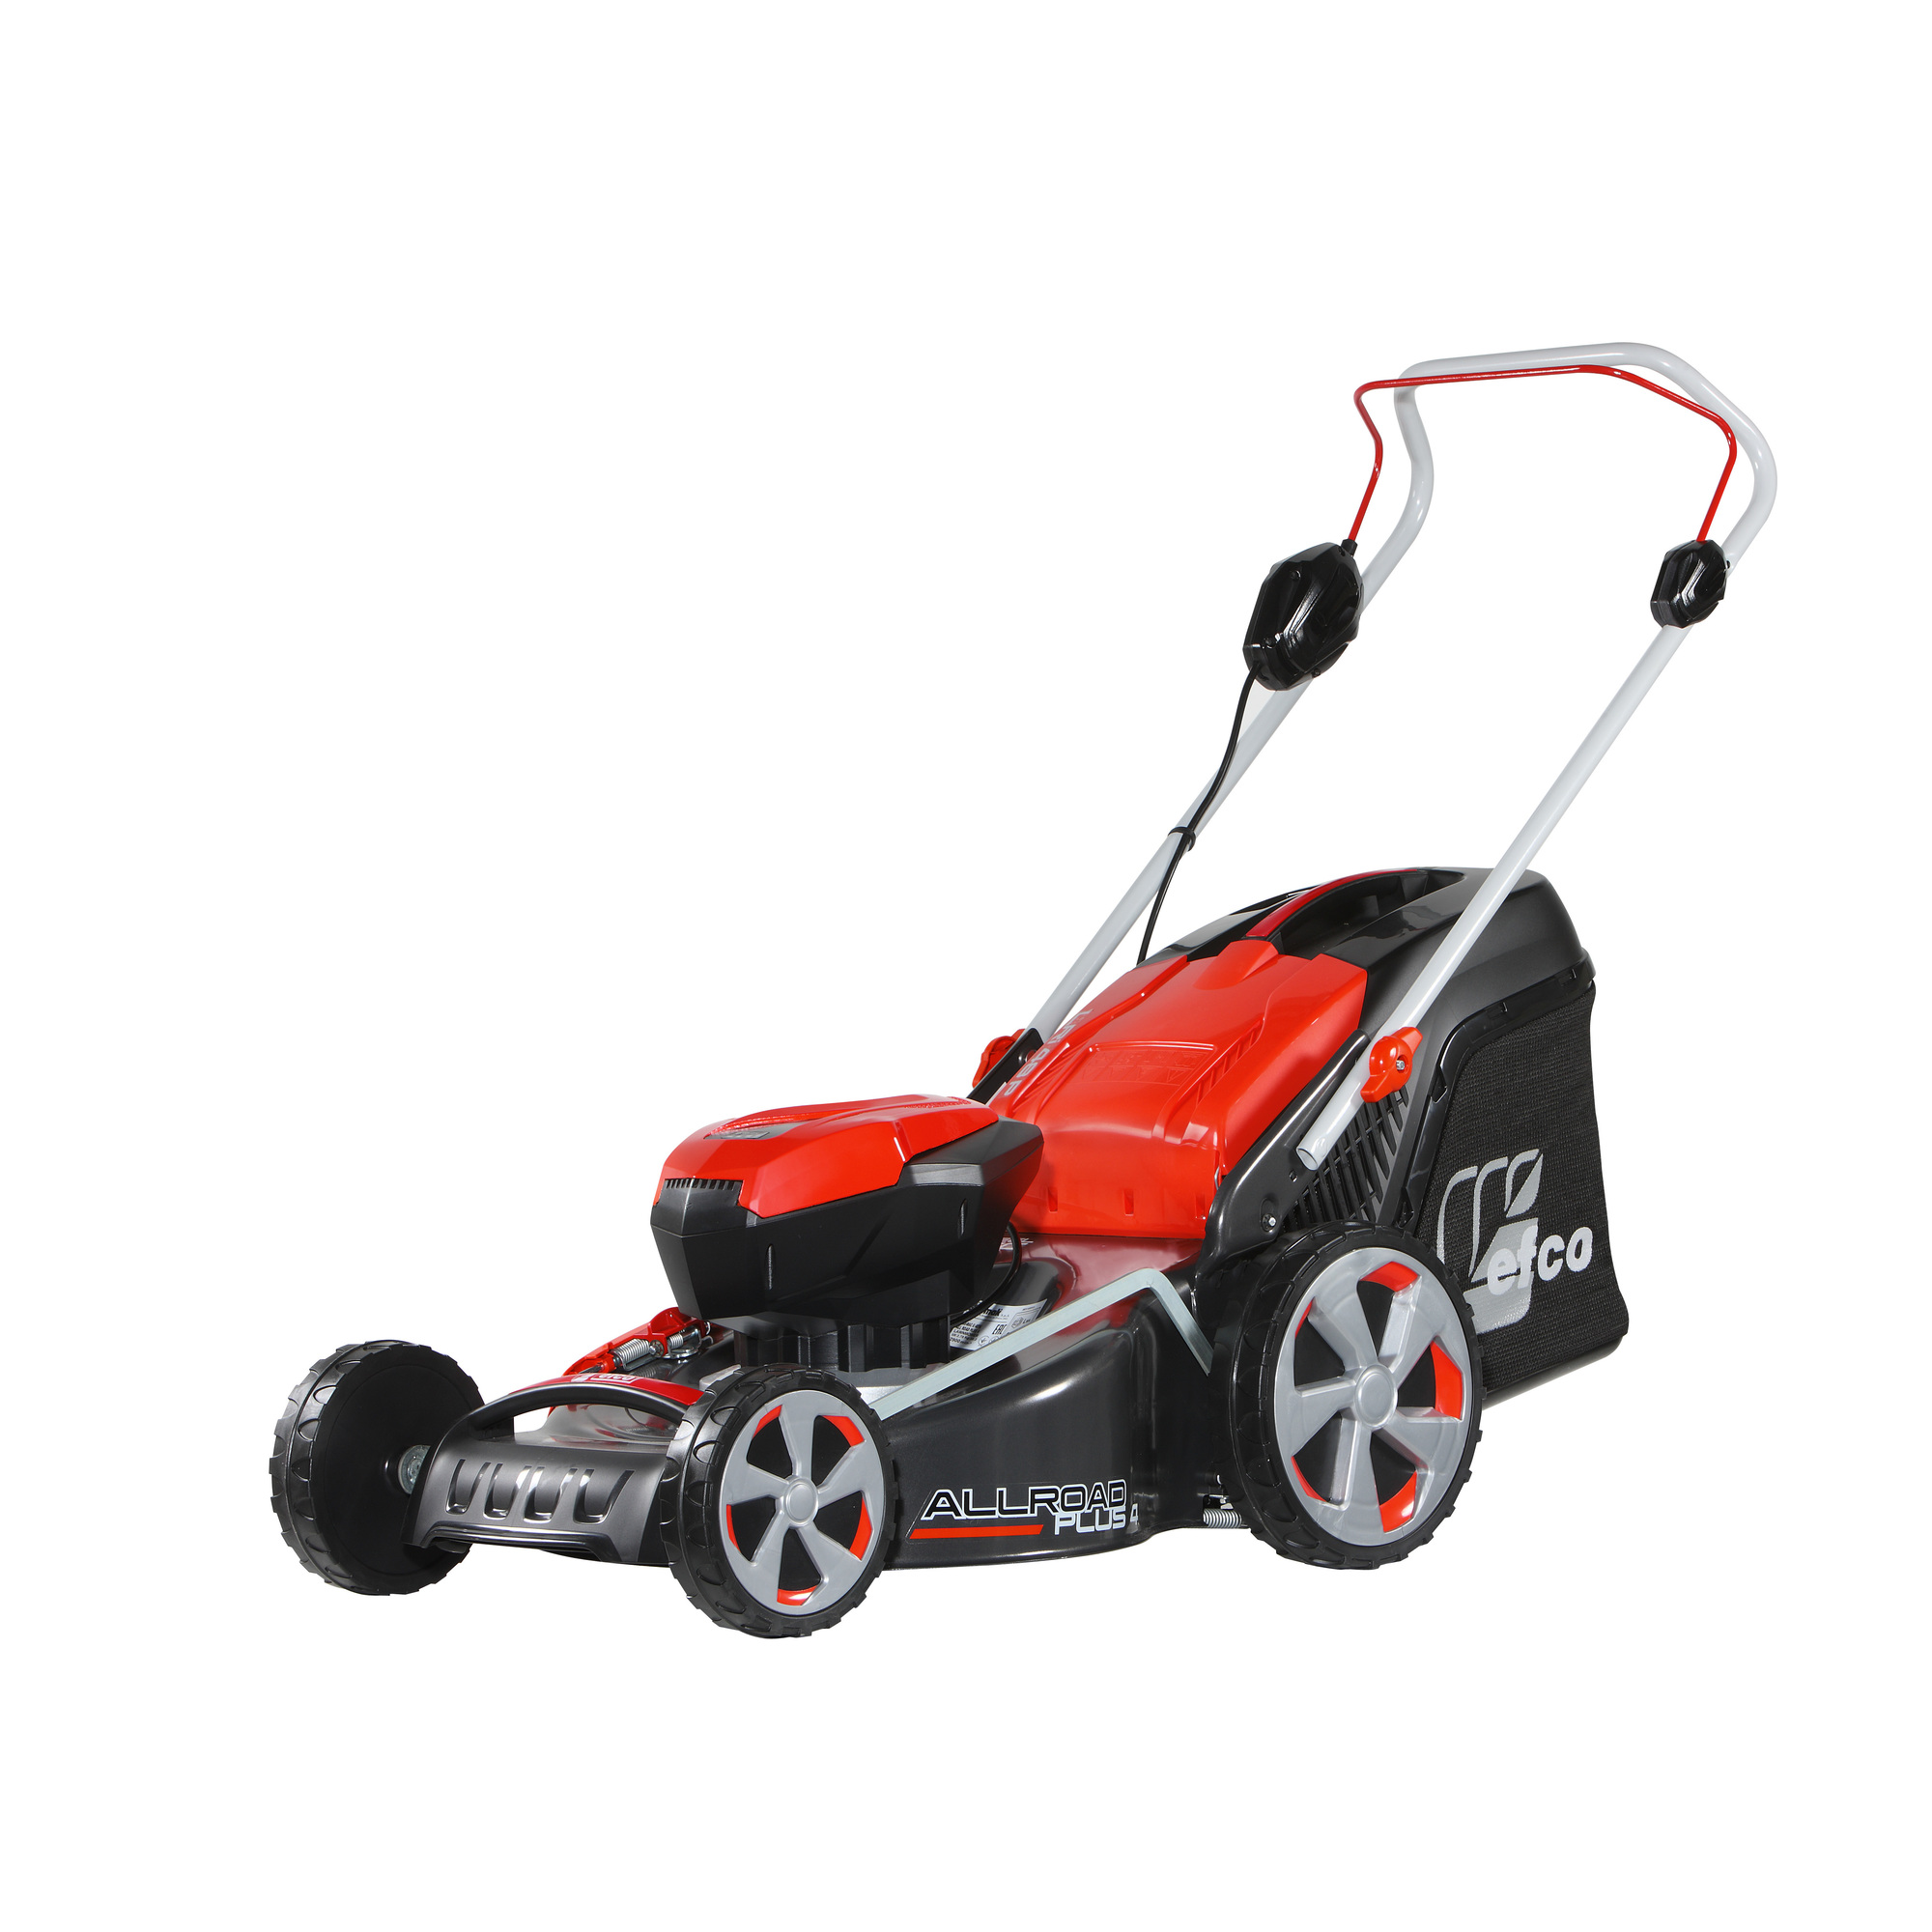 Black and Decker outdoor power tools & battery powered lawnmower